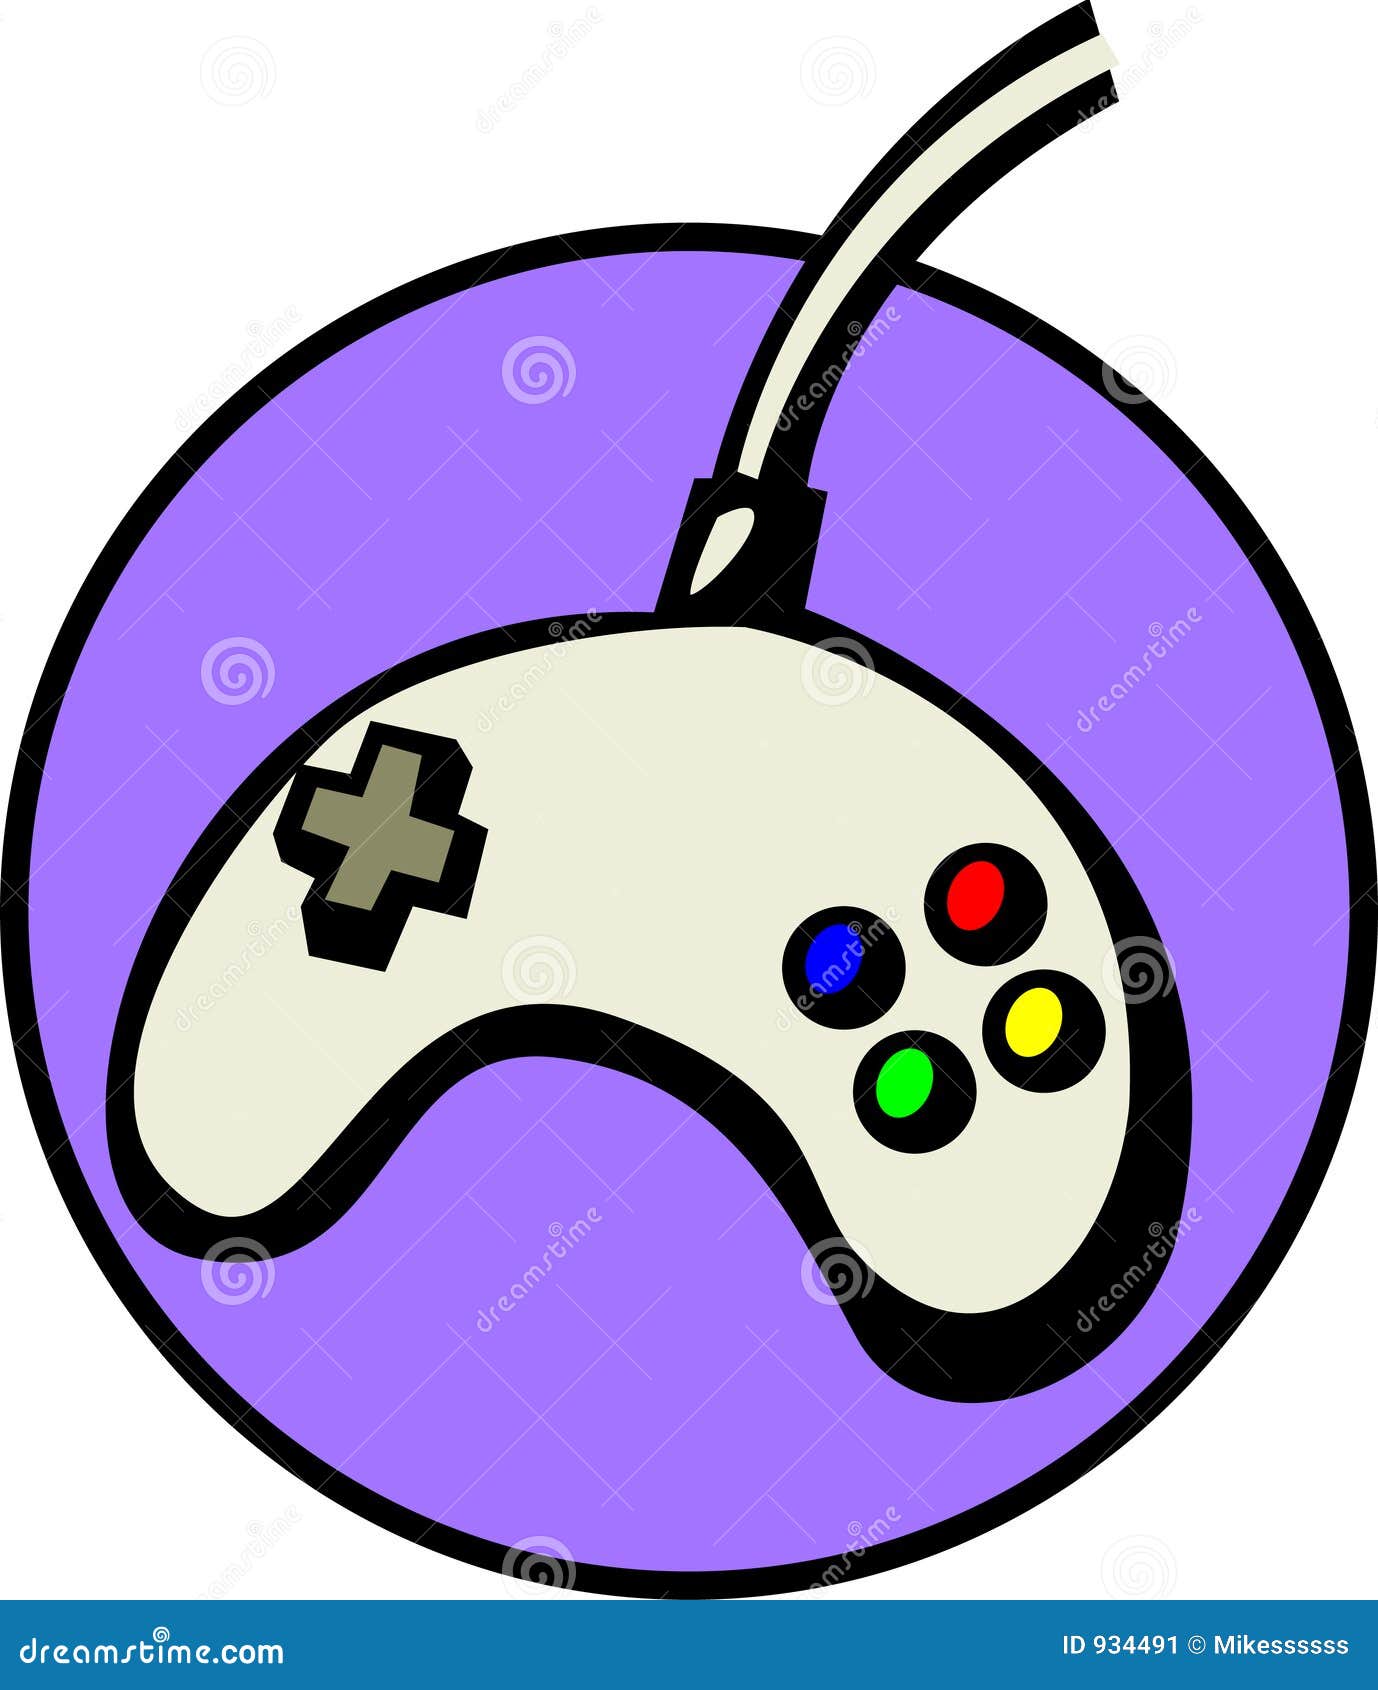 video game clipart - photo #26